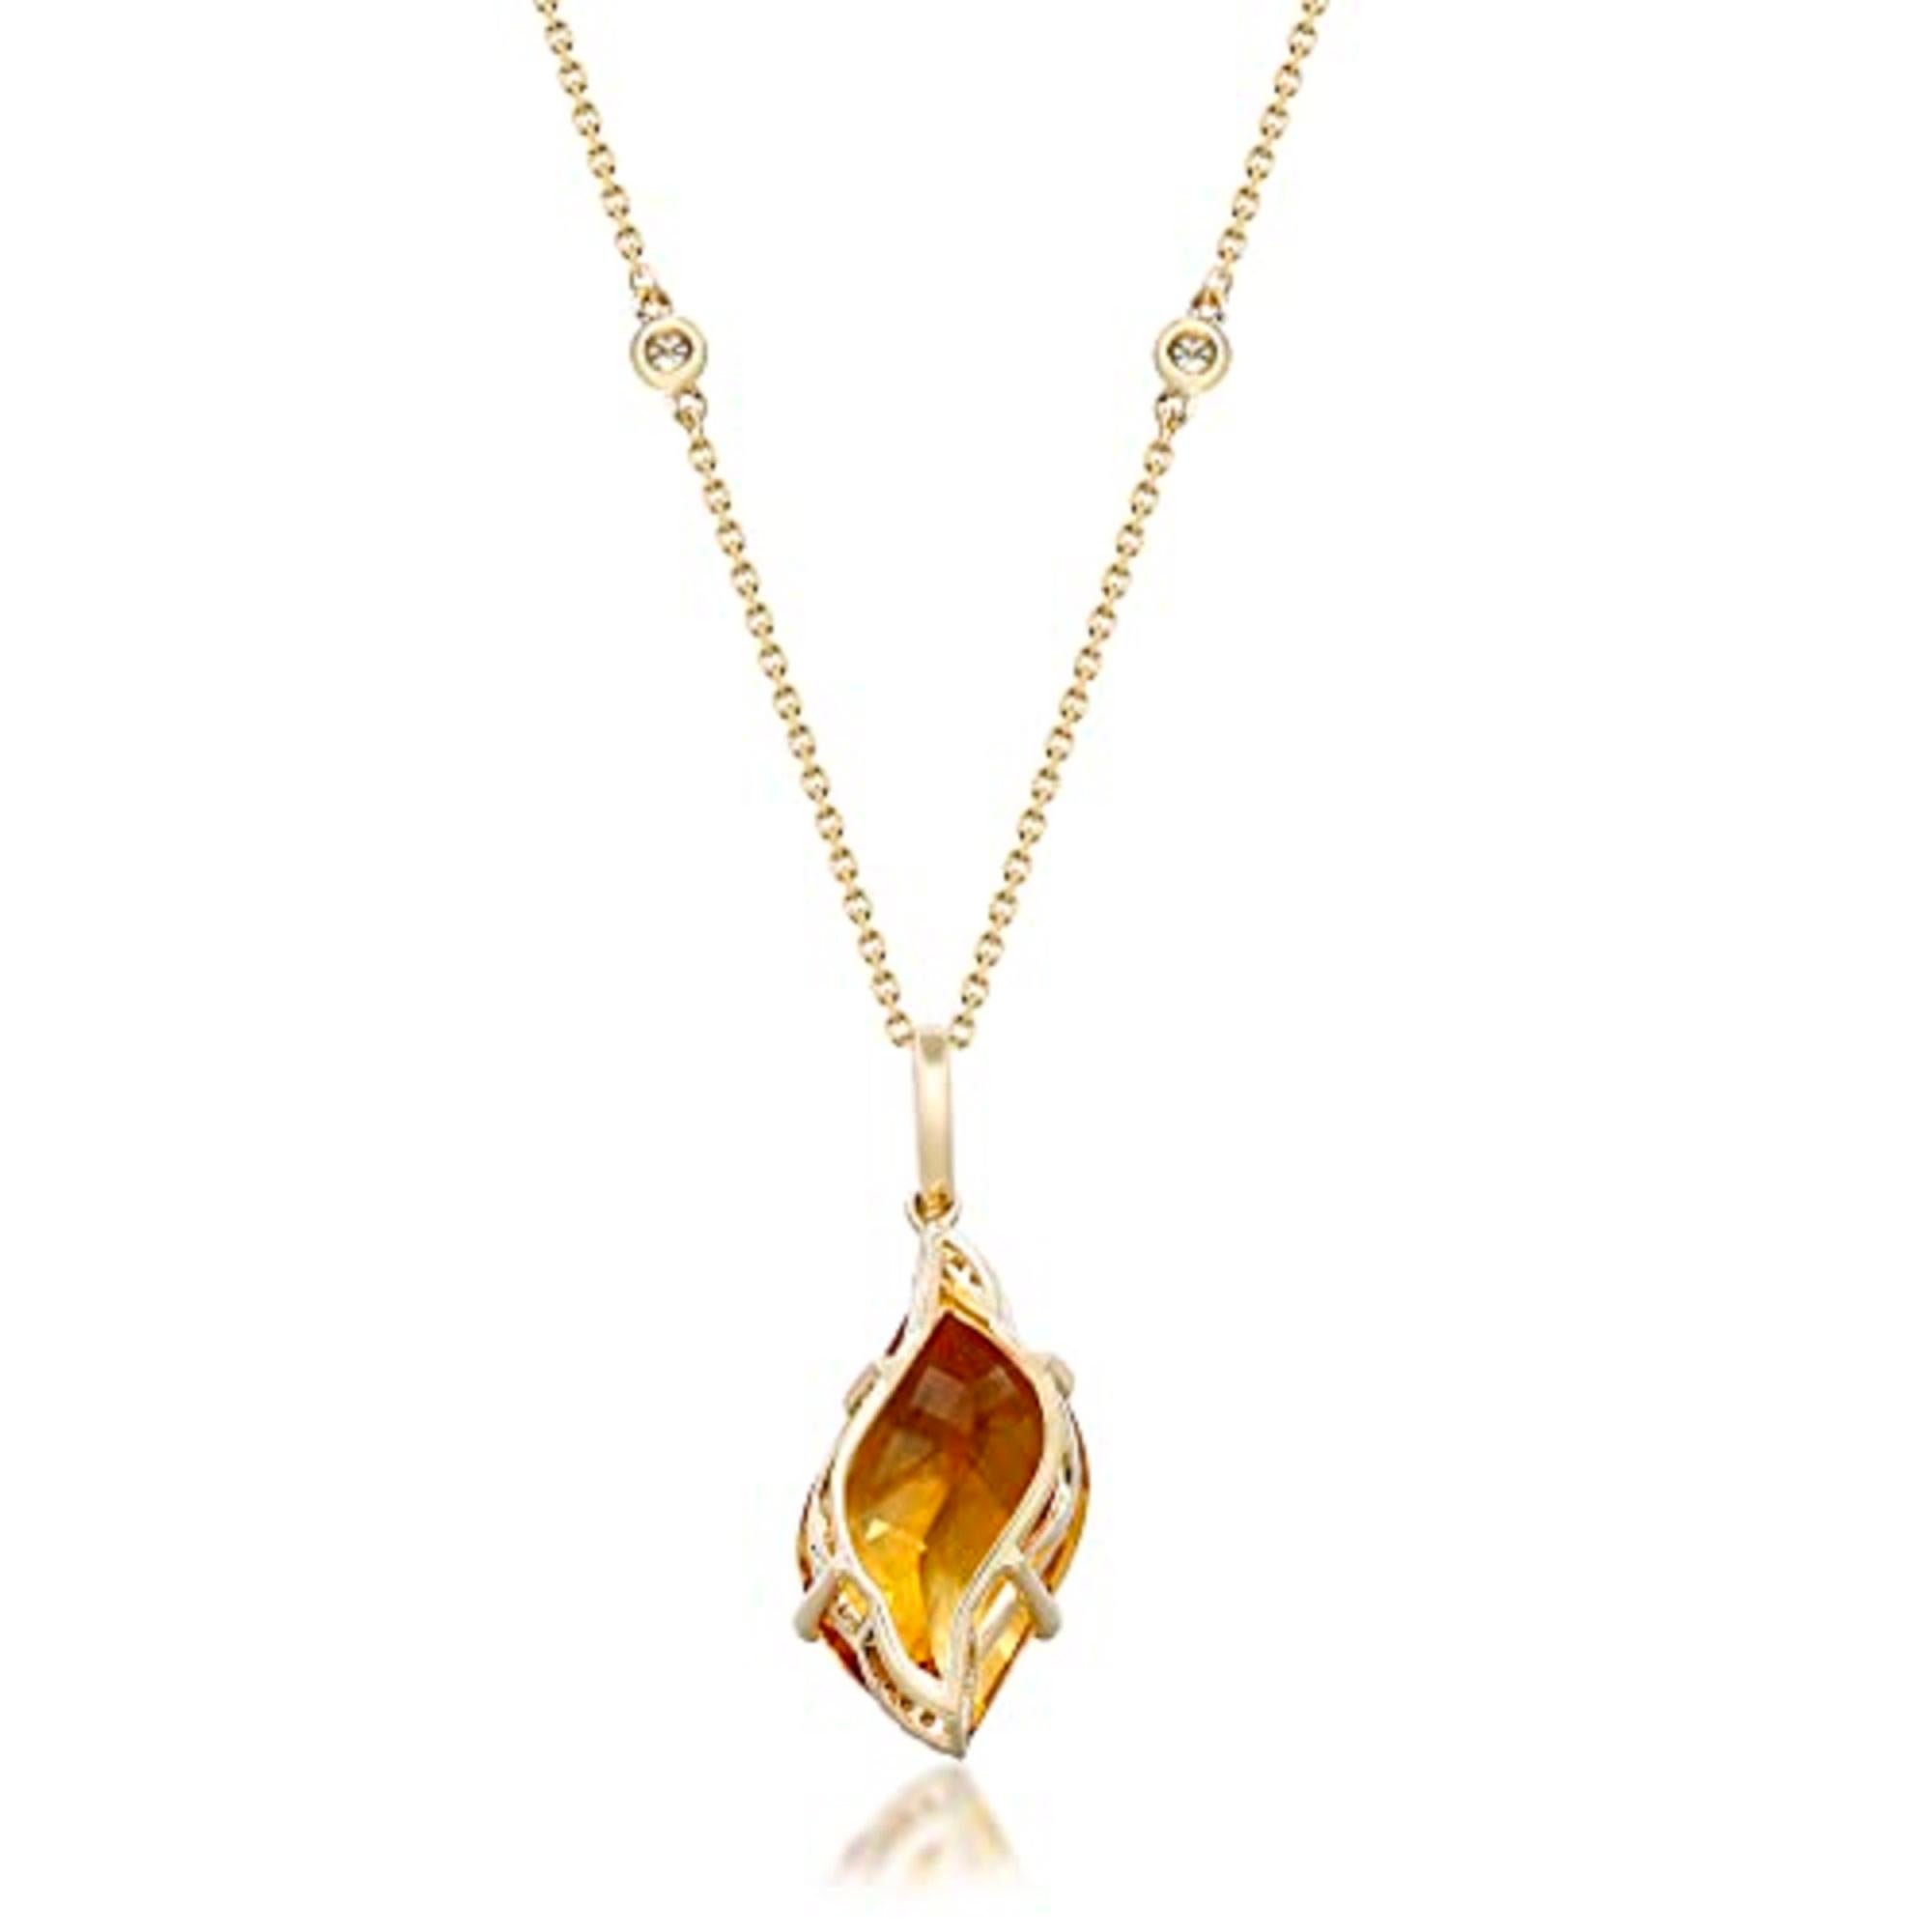 Decorate yourself in elegance with this Pendant is crafted from 14-karat Yellow Gold by Gin & Grace Pendant. This Pendant is made up of Fancy-Shape Prong setting Citrine (1 Pcs) 5.87 Carat and Round-Cut Prong setting White Diamond (20 Pcs) 0.14